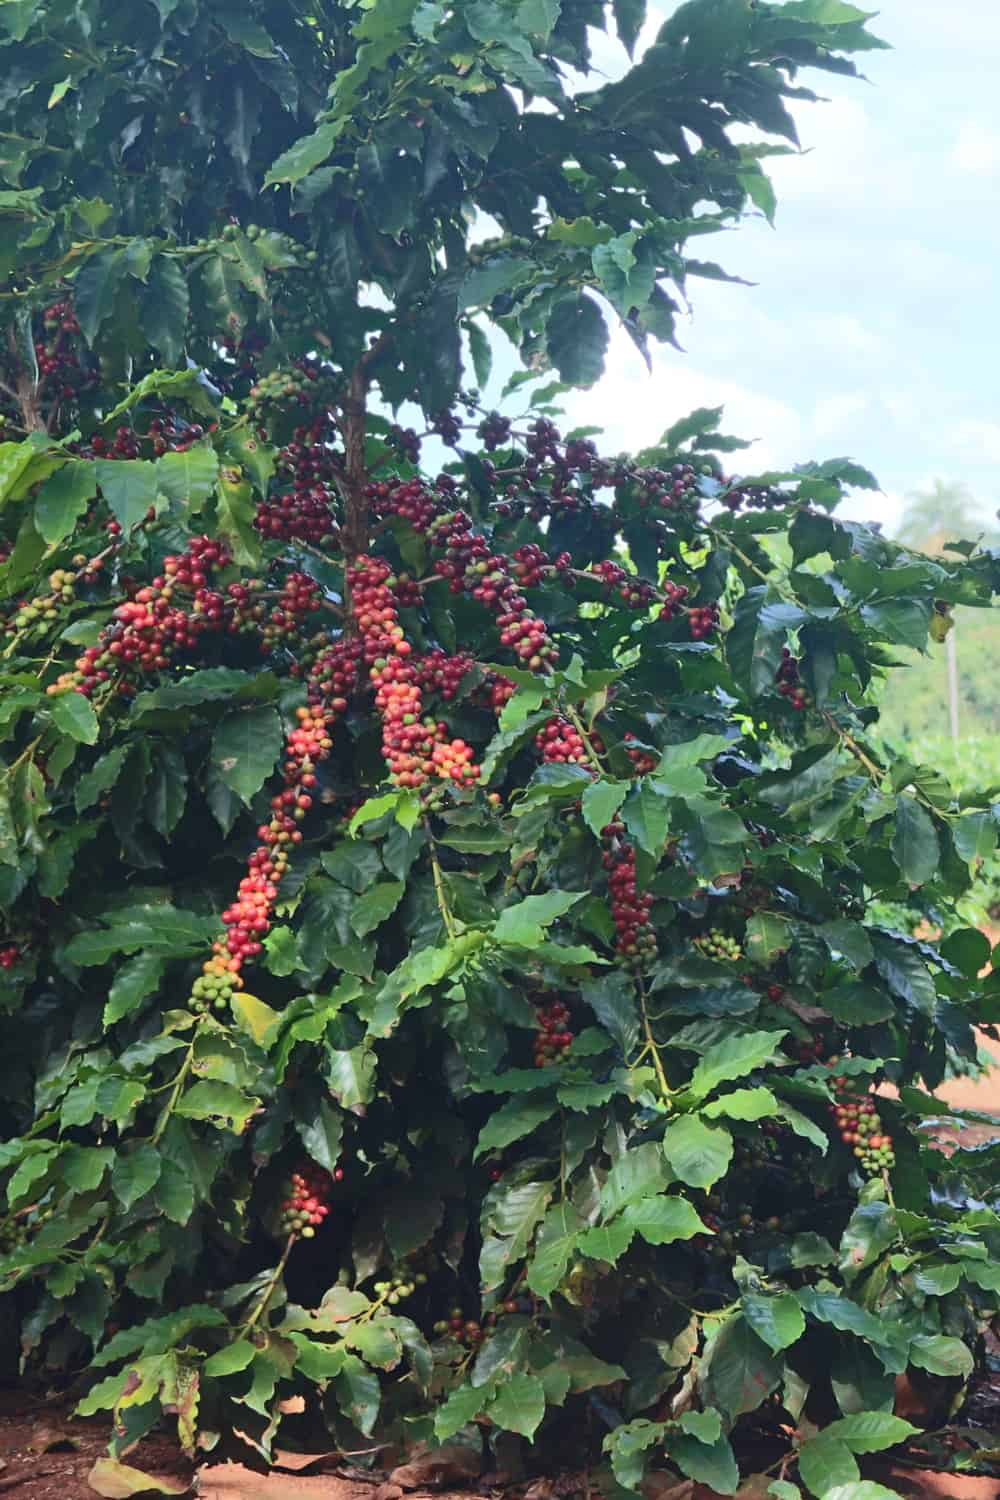 Growing conventional coffee